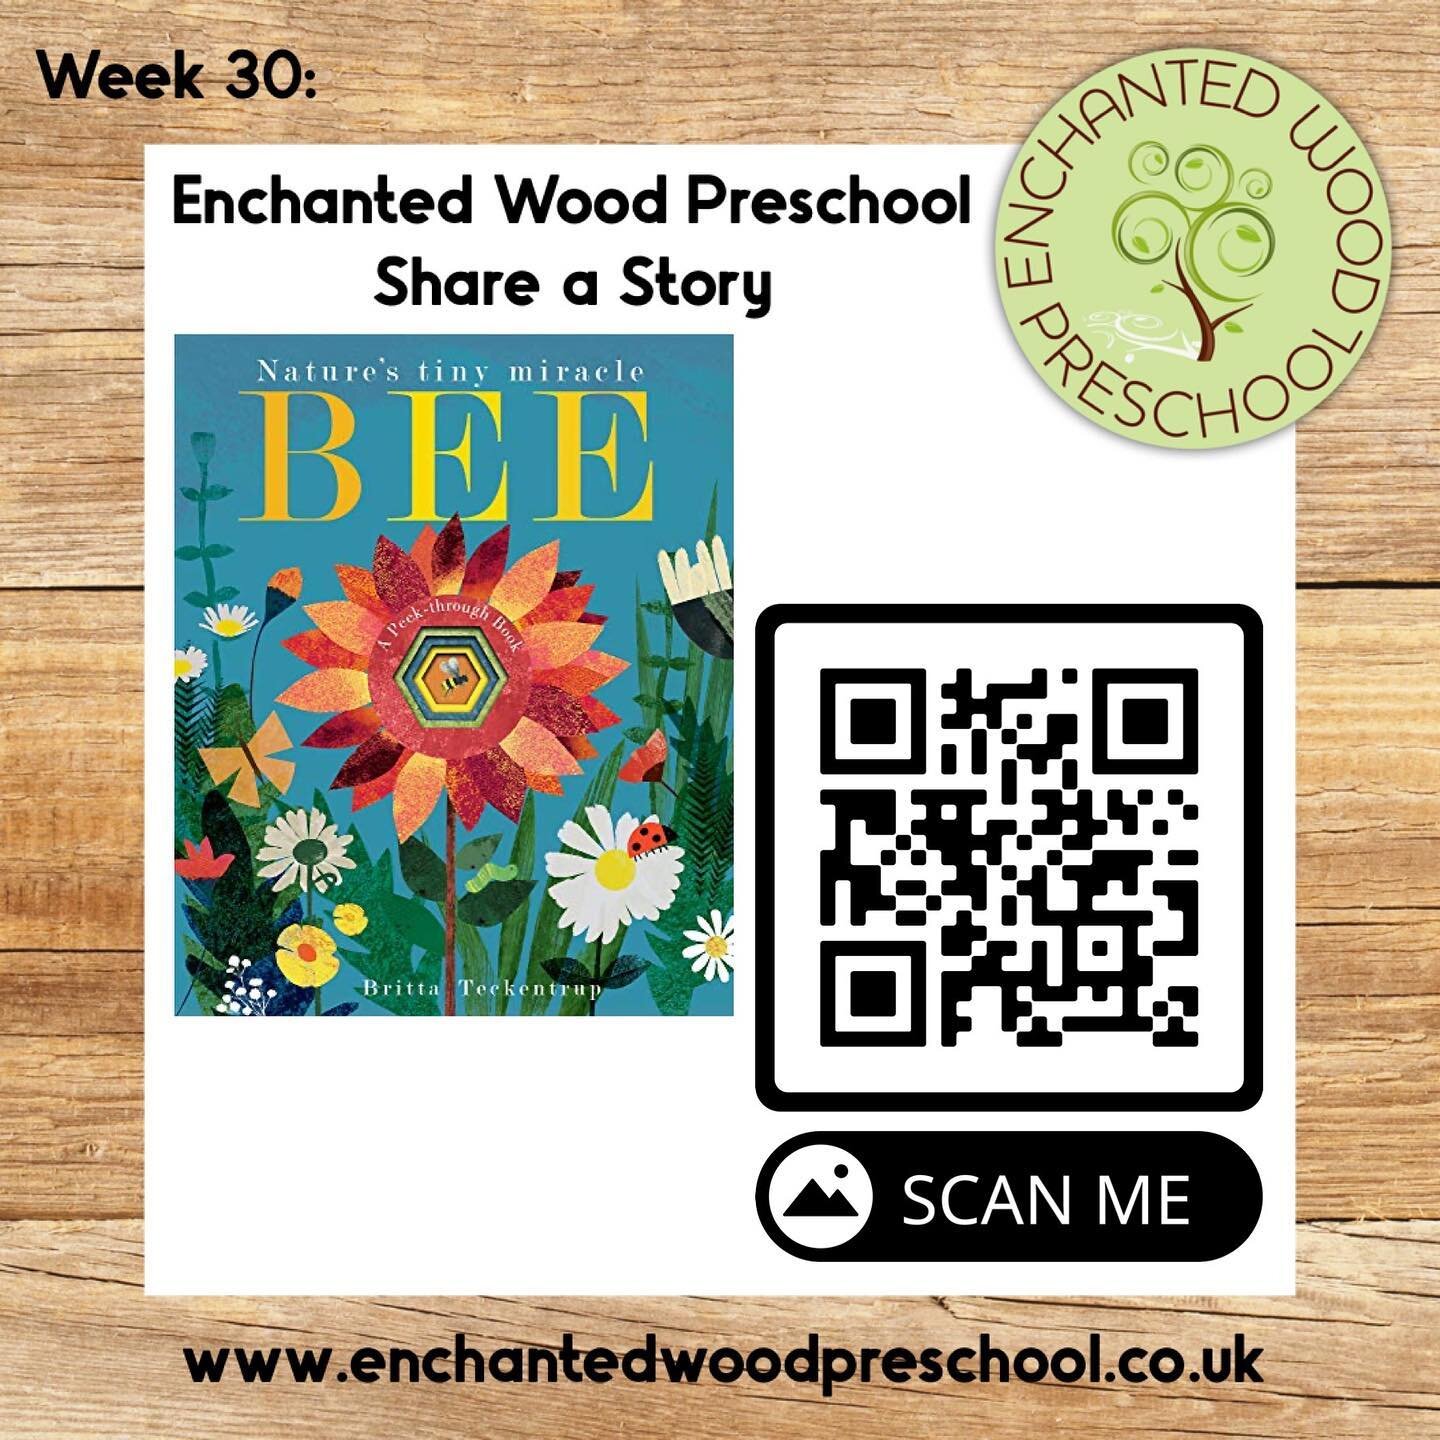 🌳 Week 30: Minibeasts 

Our book of the week is &lsquo;Bee&rsquo;

A tale of wonder is about to unfold...
Find out where Bee's miraculous journey through woods and meadows will end in this delightful peek-through picture book. The story is magically